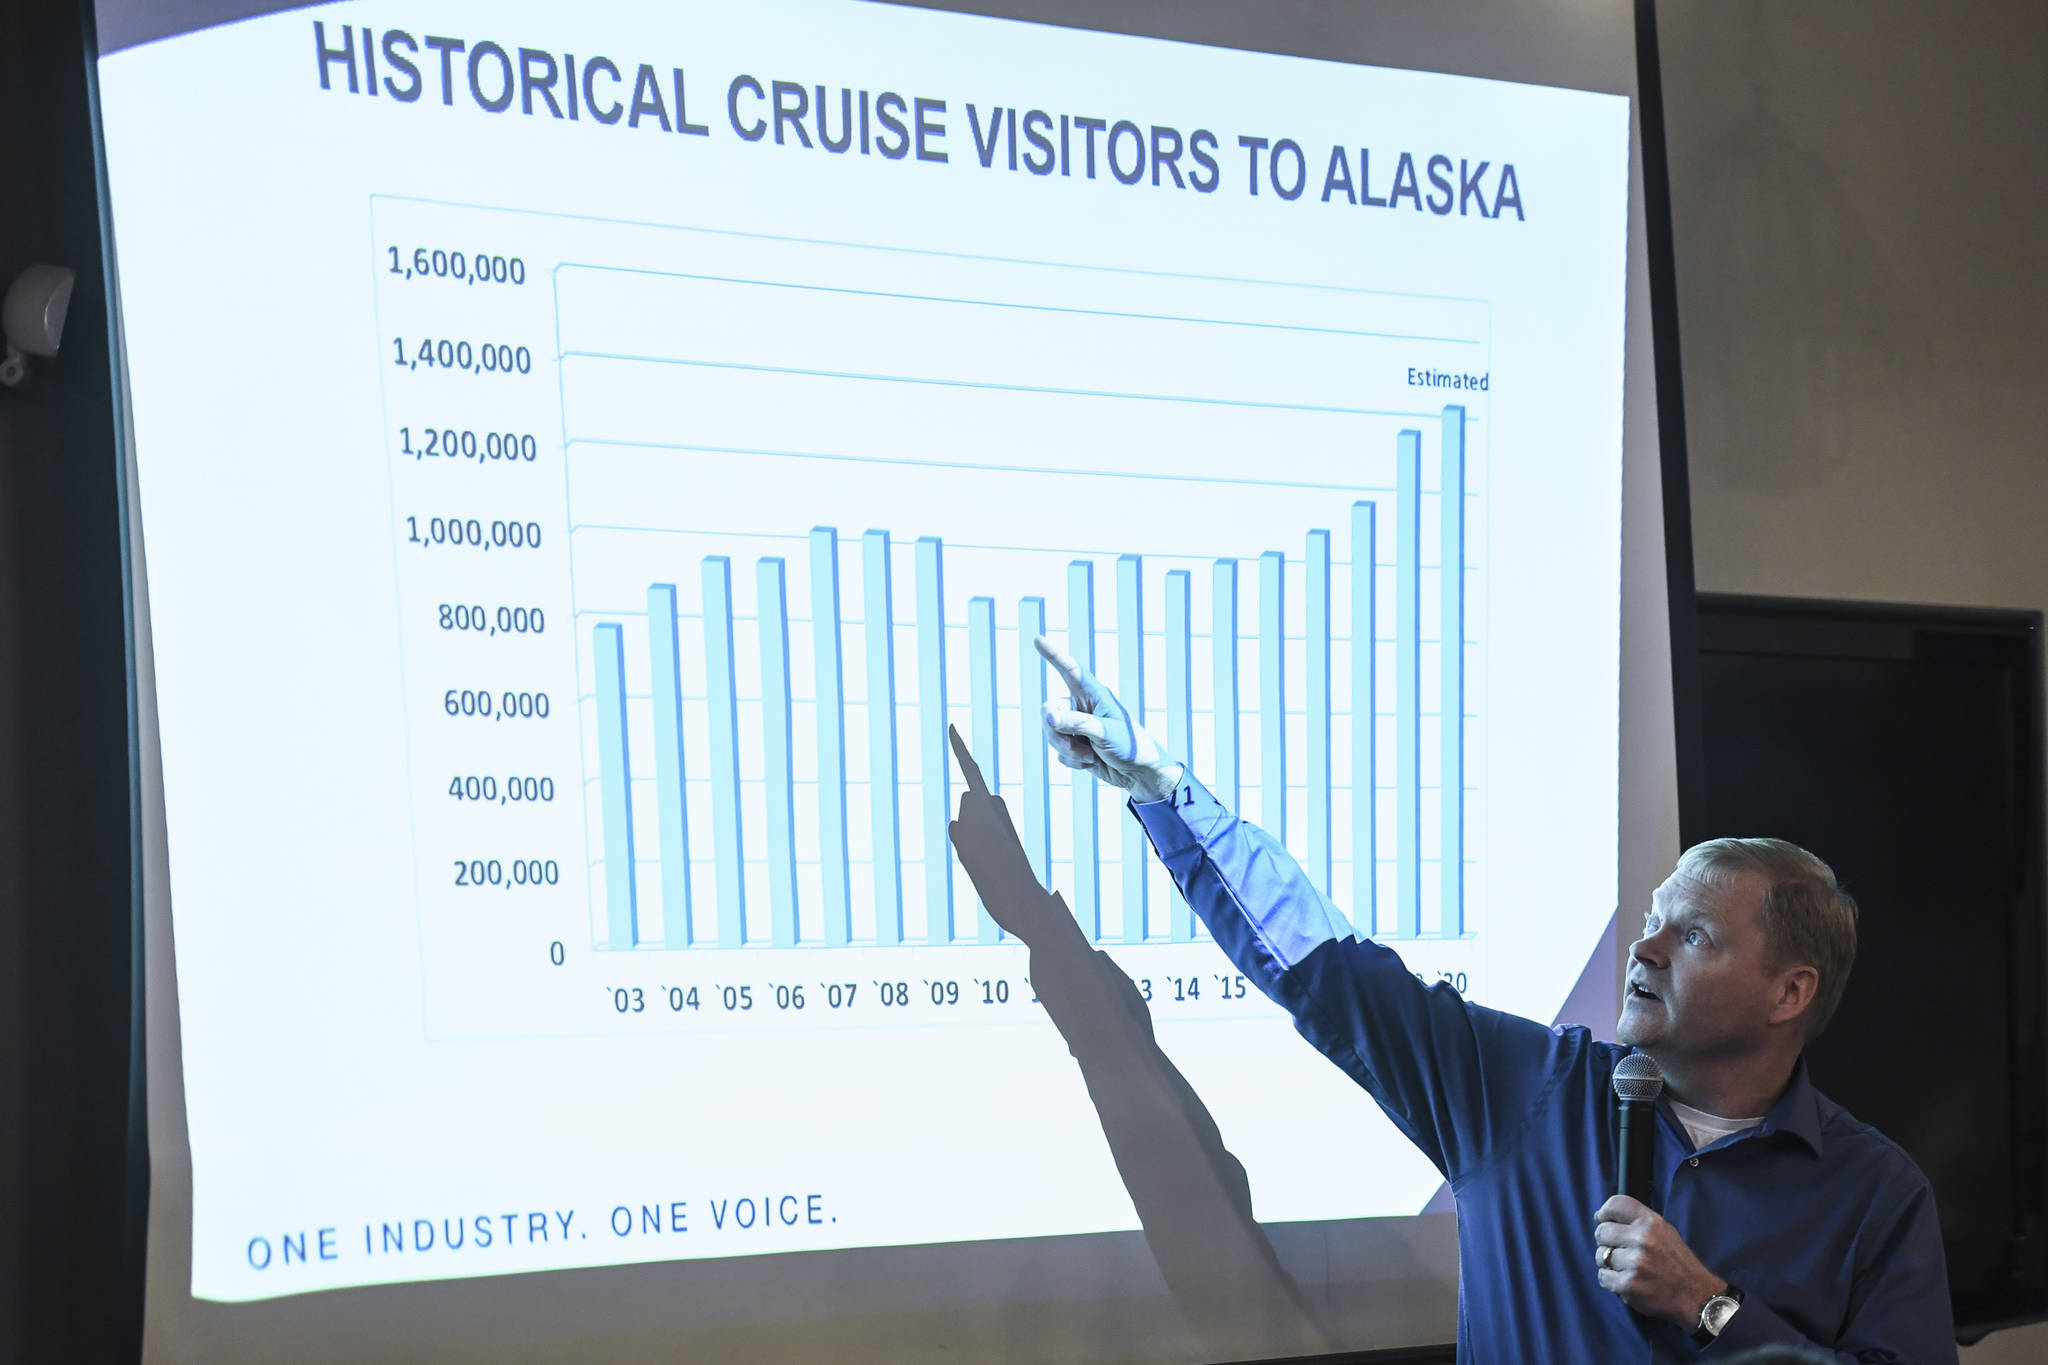 Mike Tibbles, of Cruise Lines International Association, speaks about the growing cruise industry in Juneau and Southeast Alaska at the Juneau Chamber of Commerce’s weekly luncheon at the Moose Lodge on Thursday, Dec. 5, 2019. Tibbles was part of a panel that included John McConnochie, owner of Cycle Alaska, and Drew Green, Port Manager at Cruise Line Agencies. (Michael Penn | Juneau Empire)